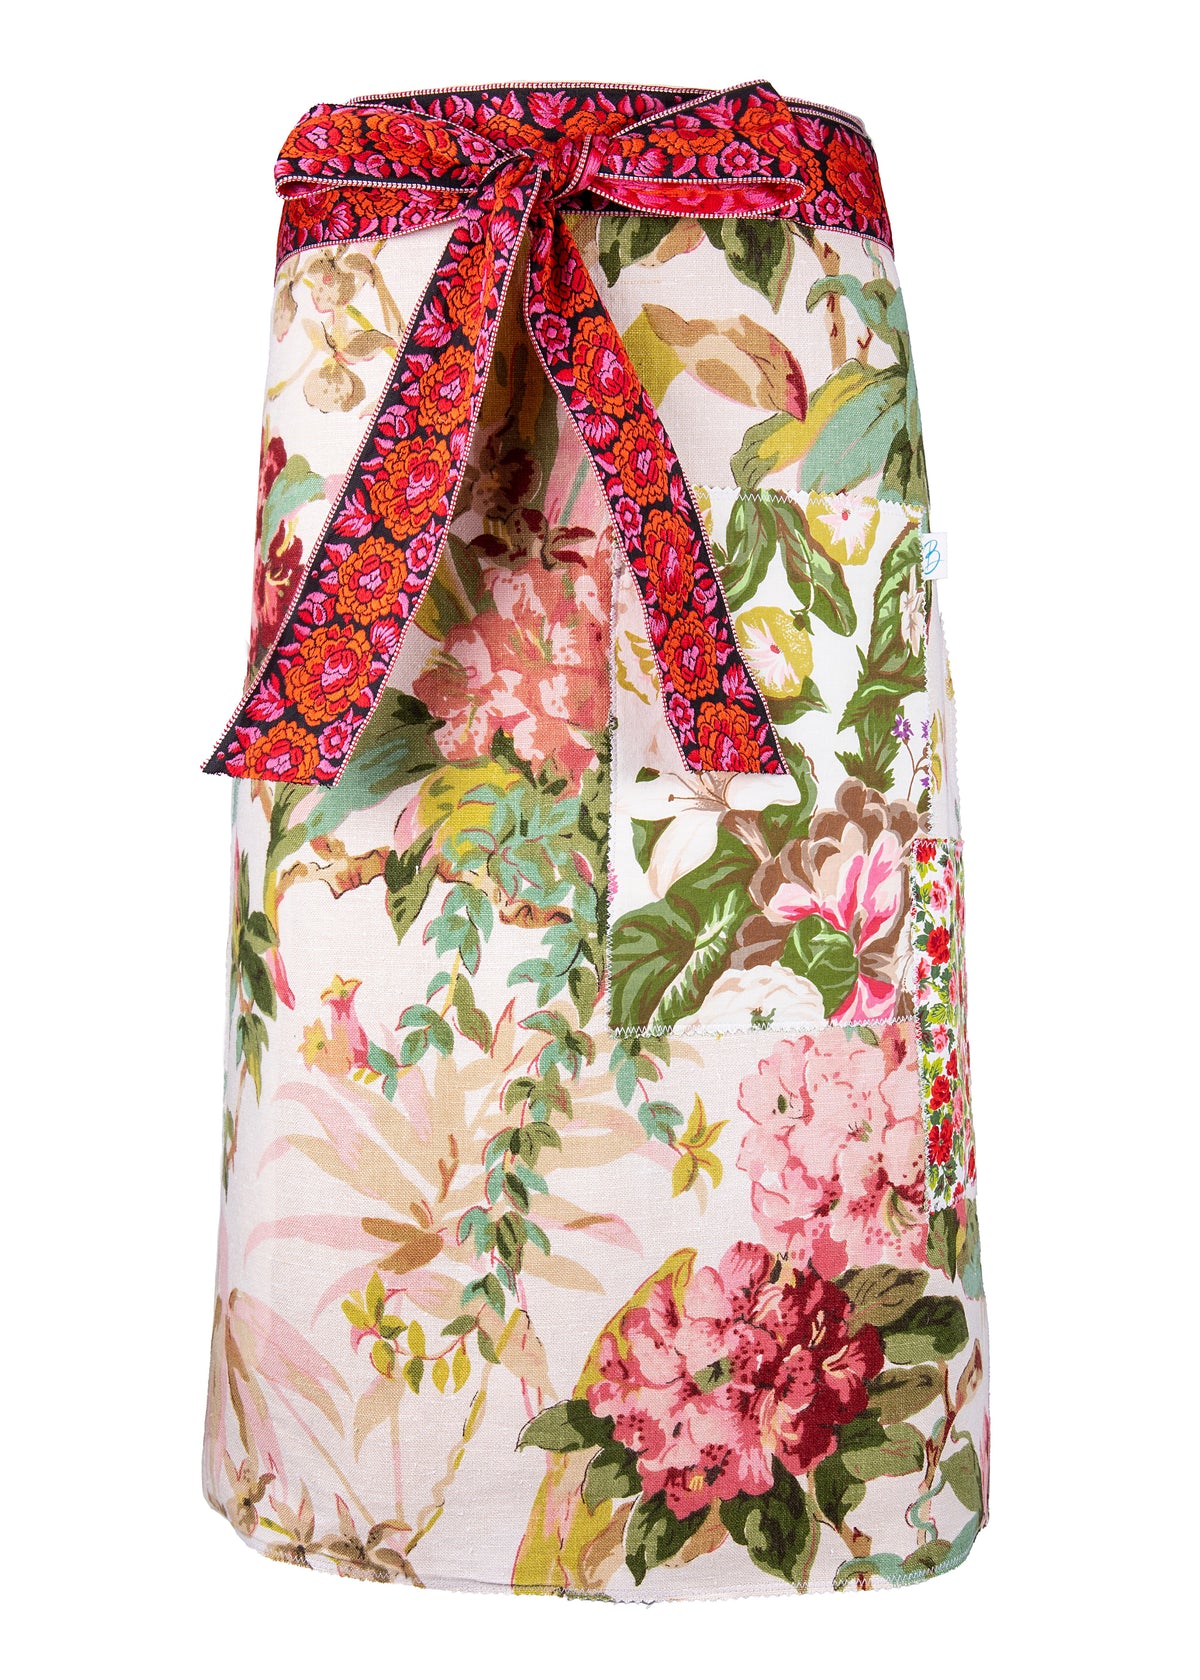 Vintage Rhododendron Apron with Mixed Floral Pockets and Pink Red Ribbon